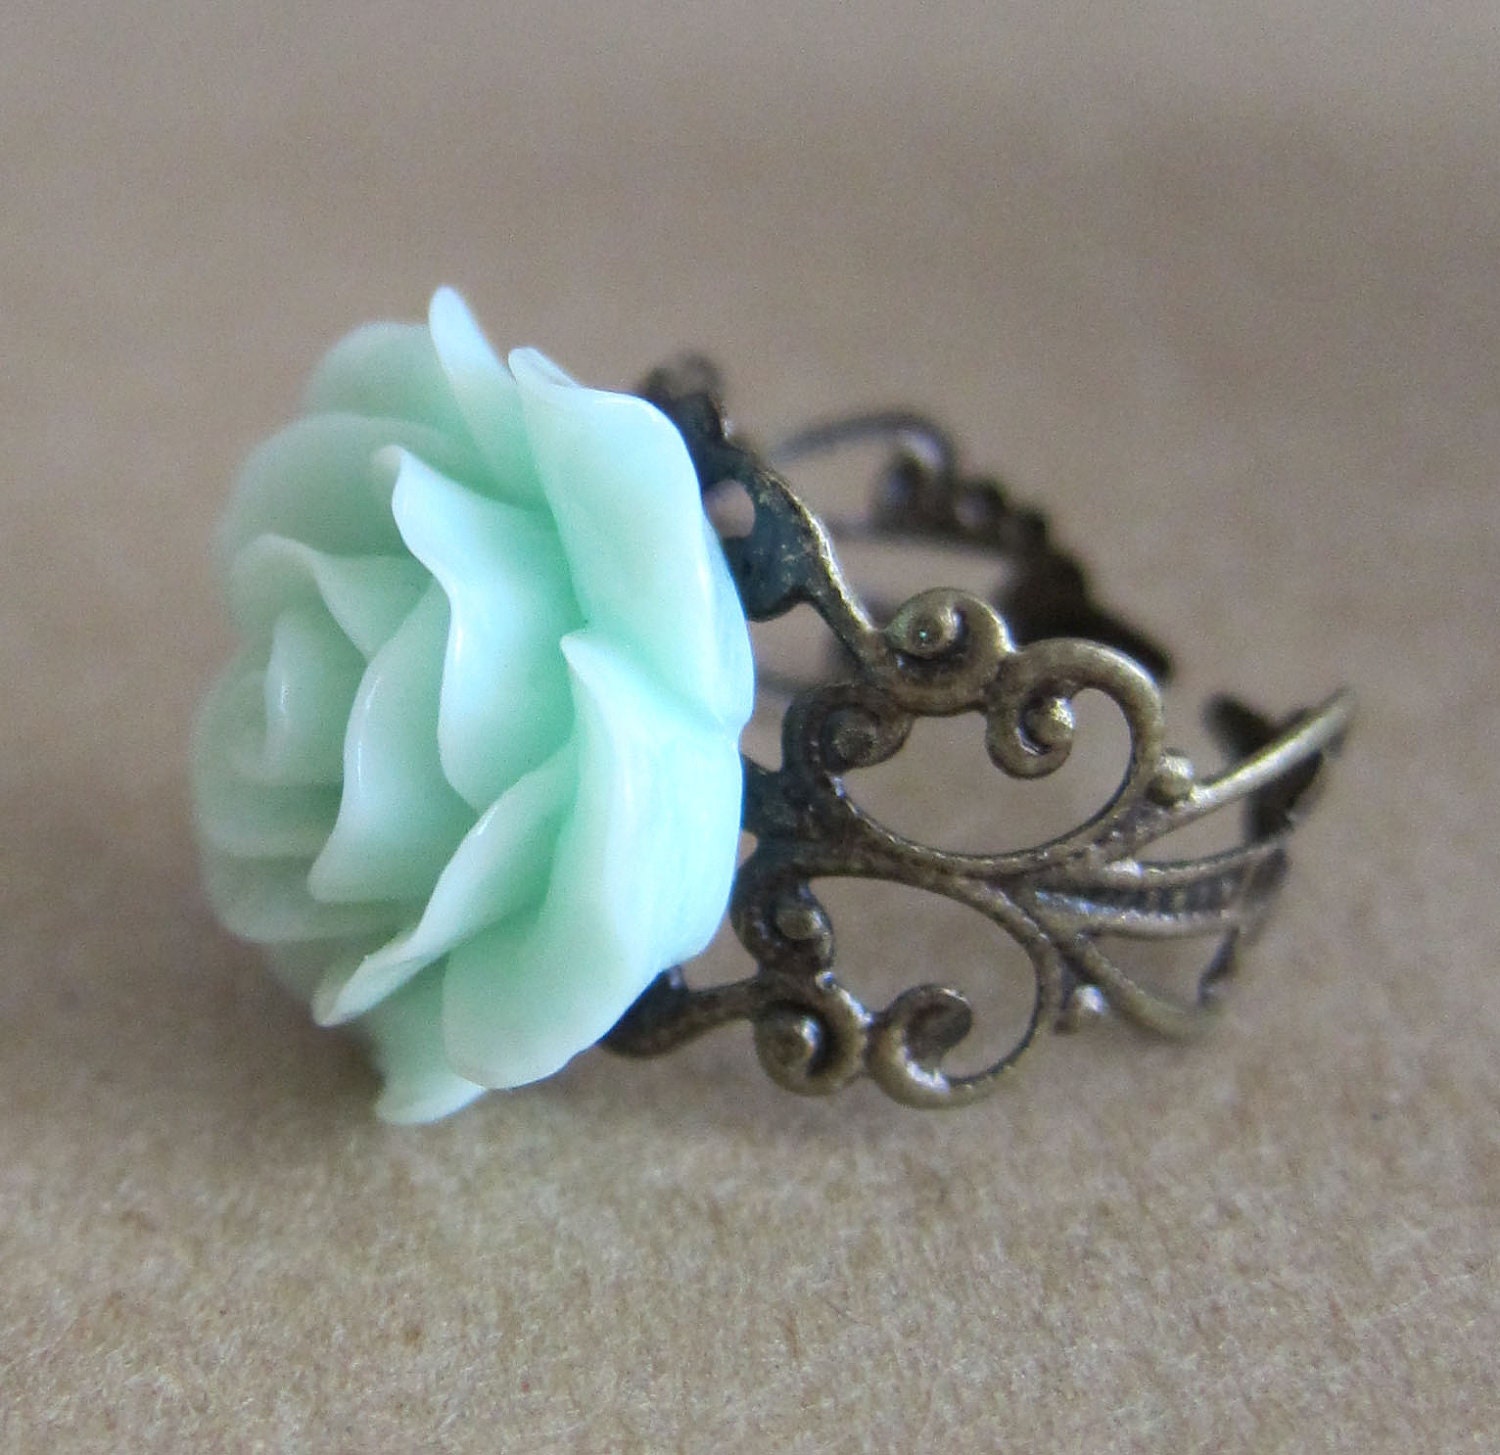 Mint Floral Ring Mint Rose Ring Mint Green Rose Ring Antique Filigree Ring - L'Amour - Antique Brass Filigree